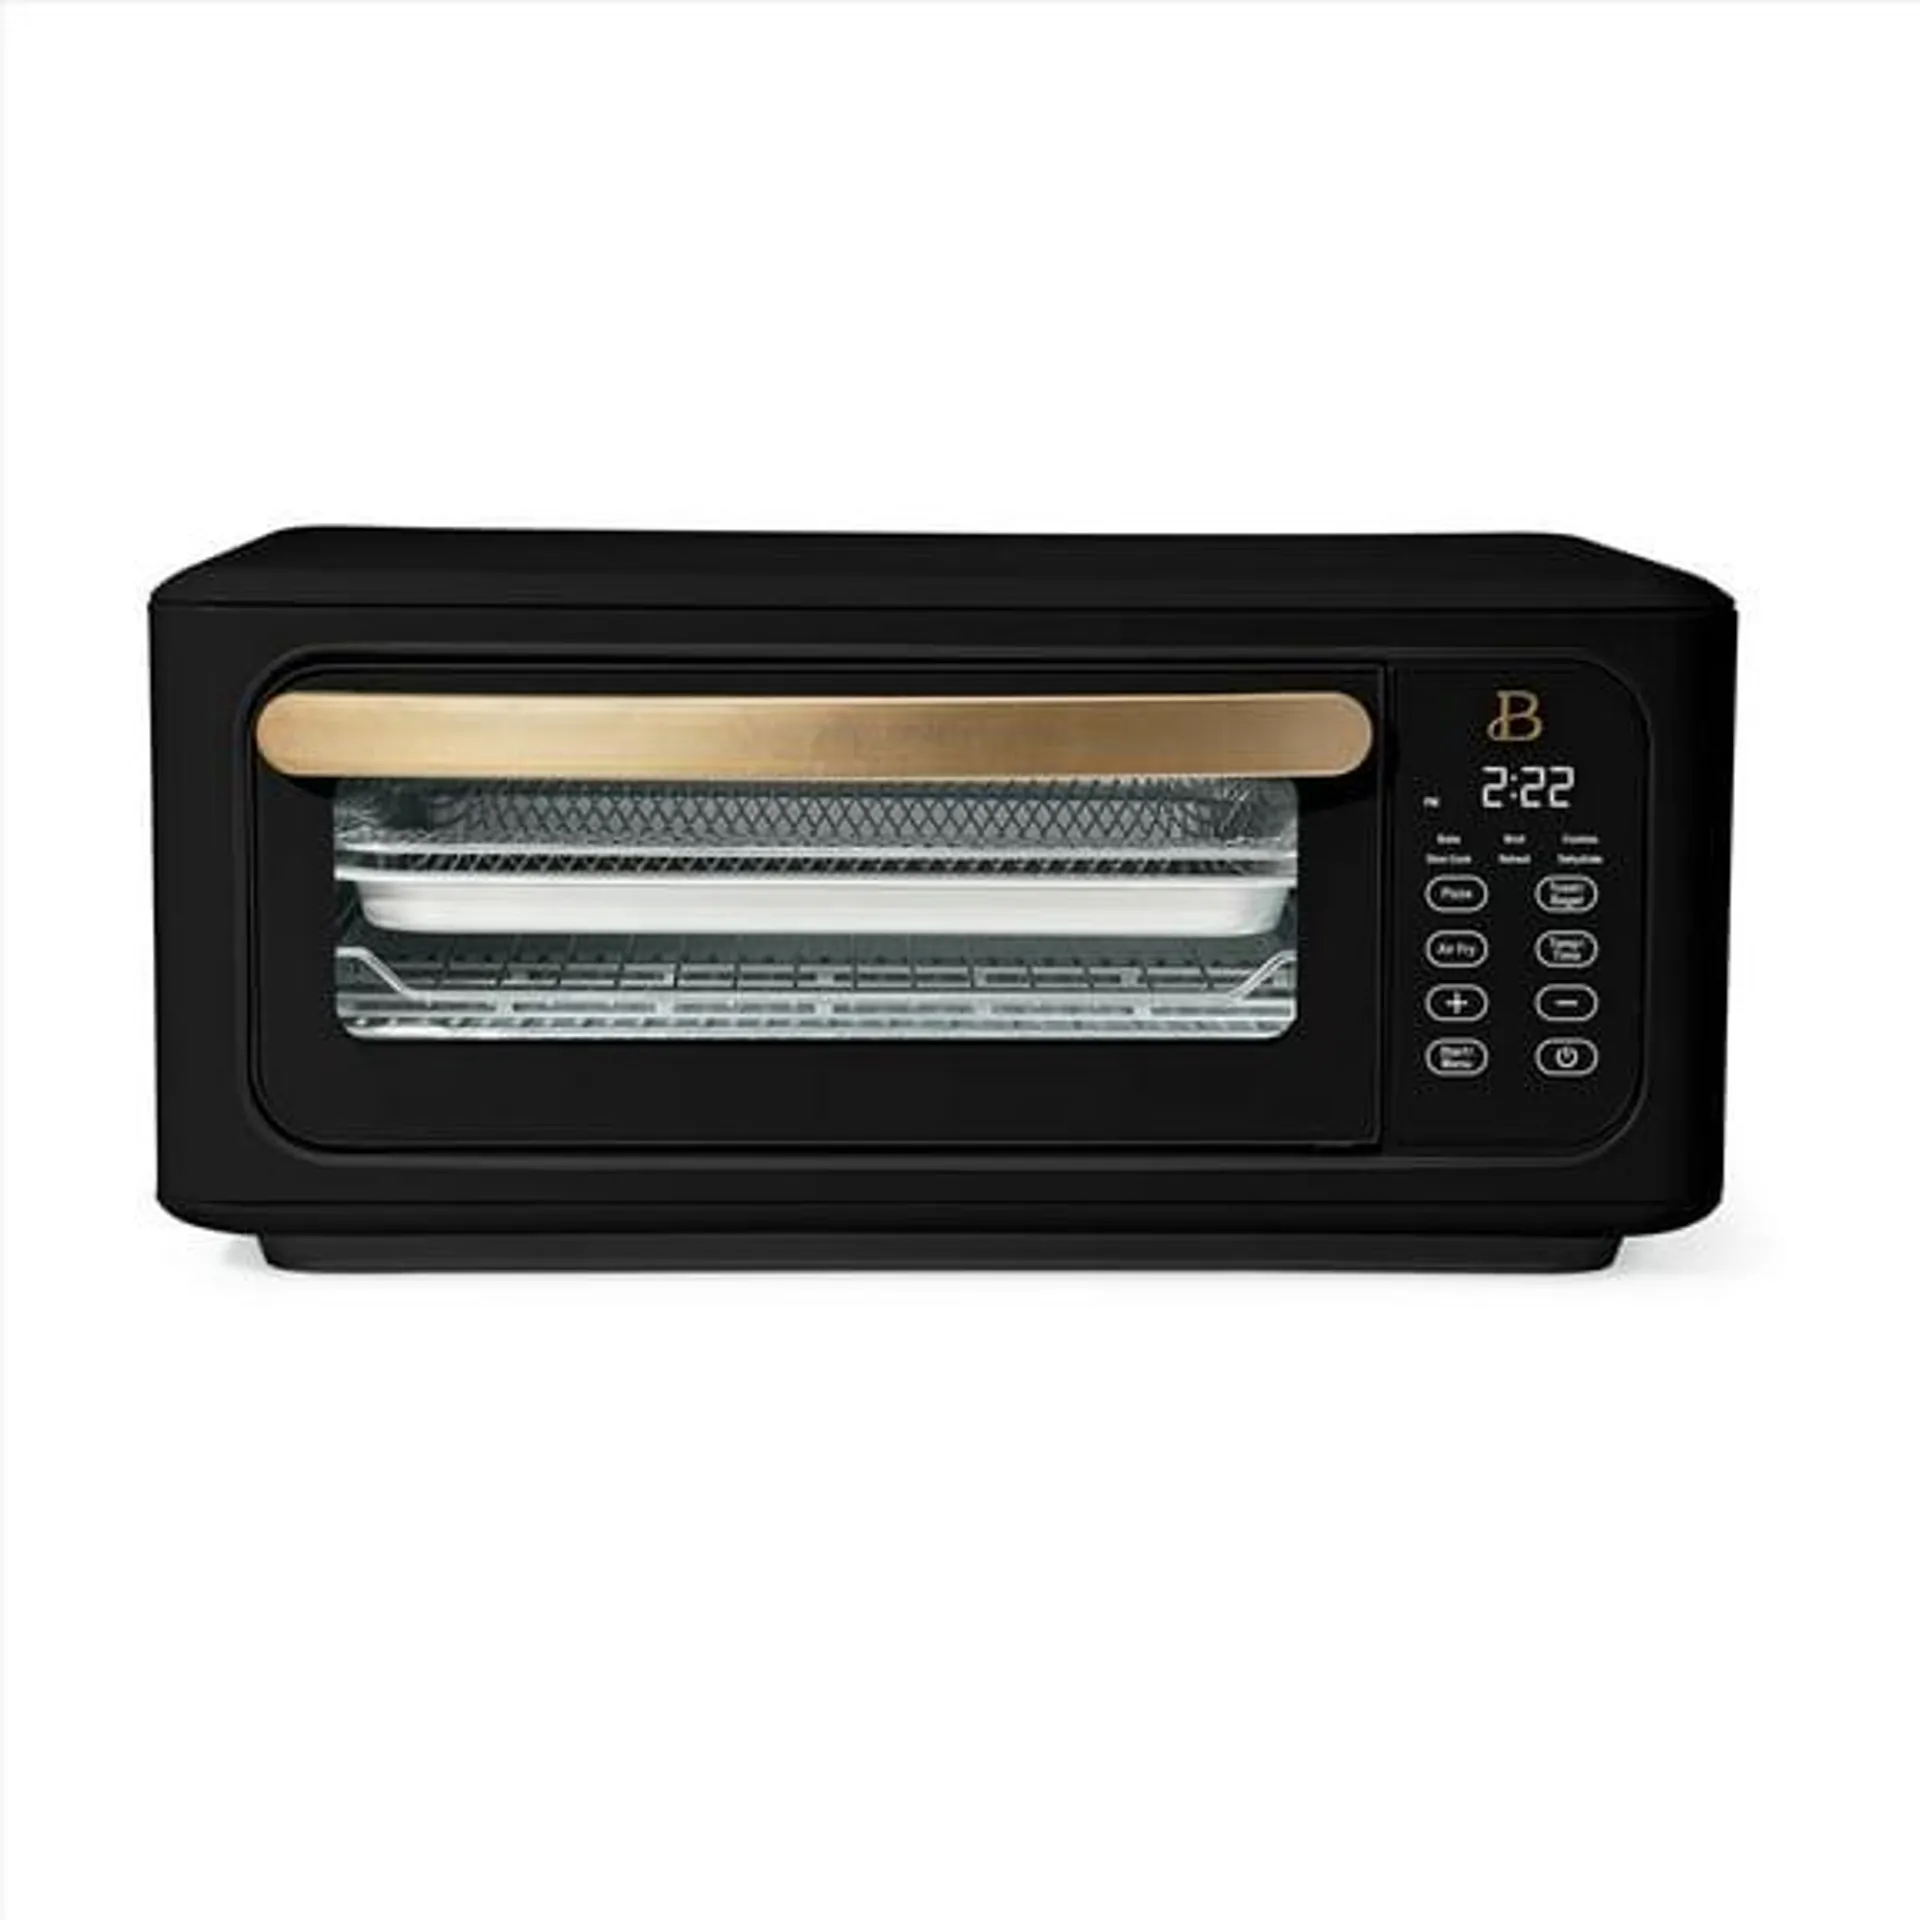 Beautiful Infrared Air Fry Toaster Oven, 9-Slice, 1800 W, Black Sesame by Drew Barrymore